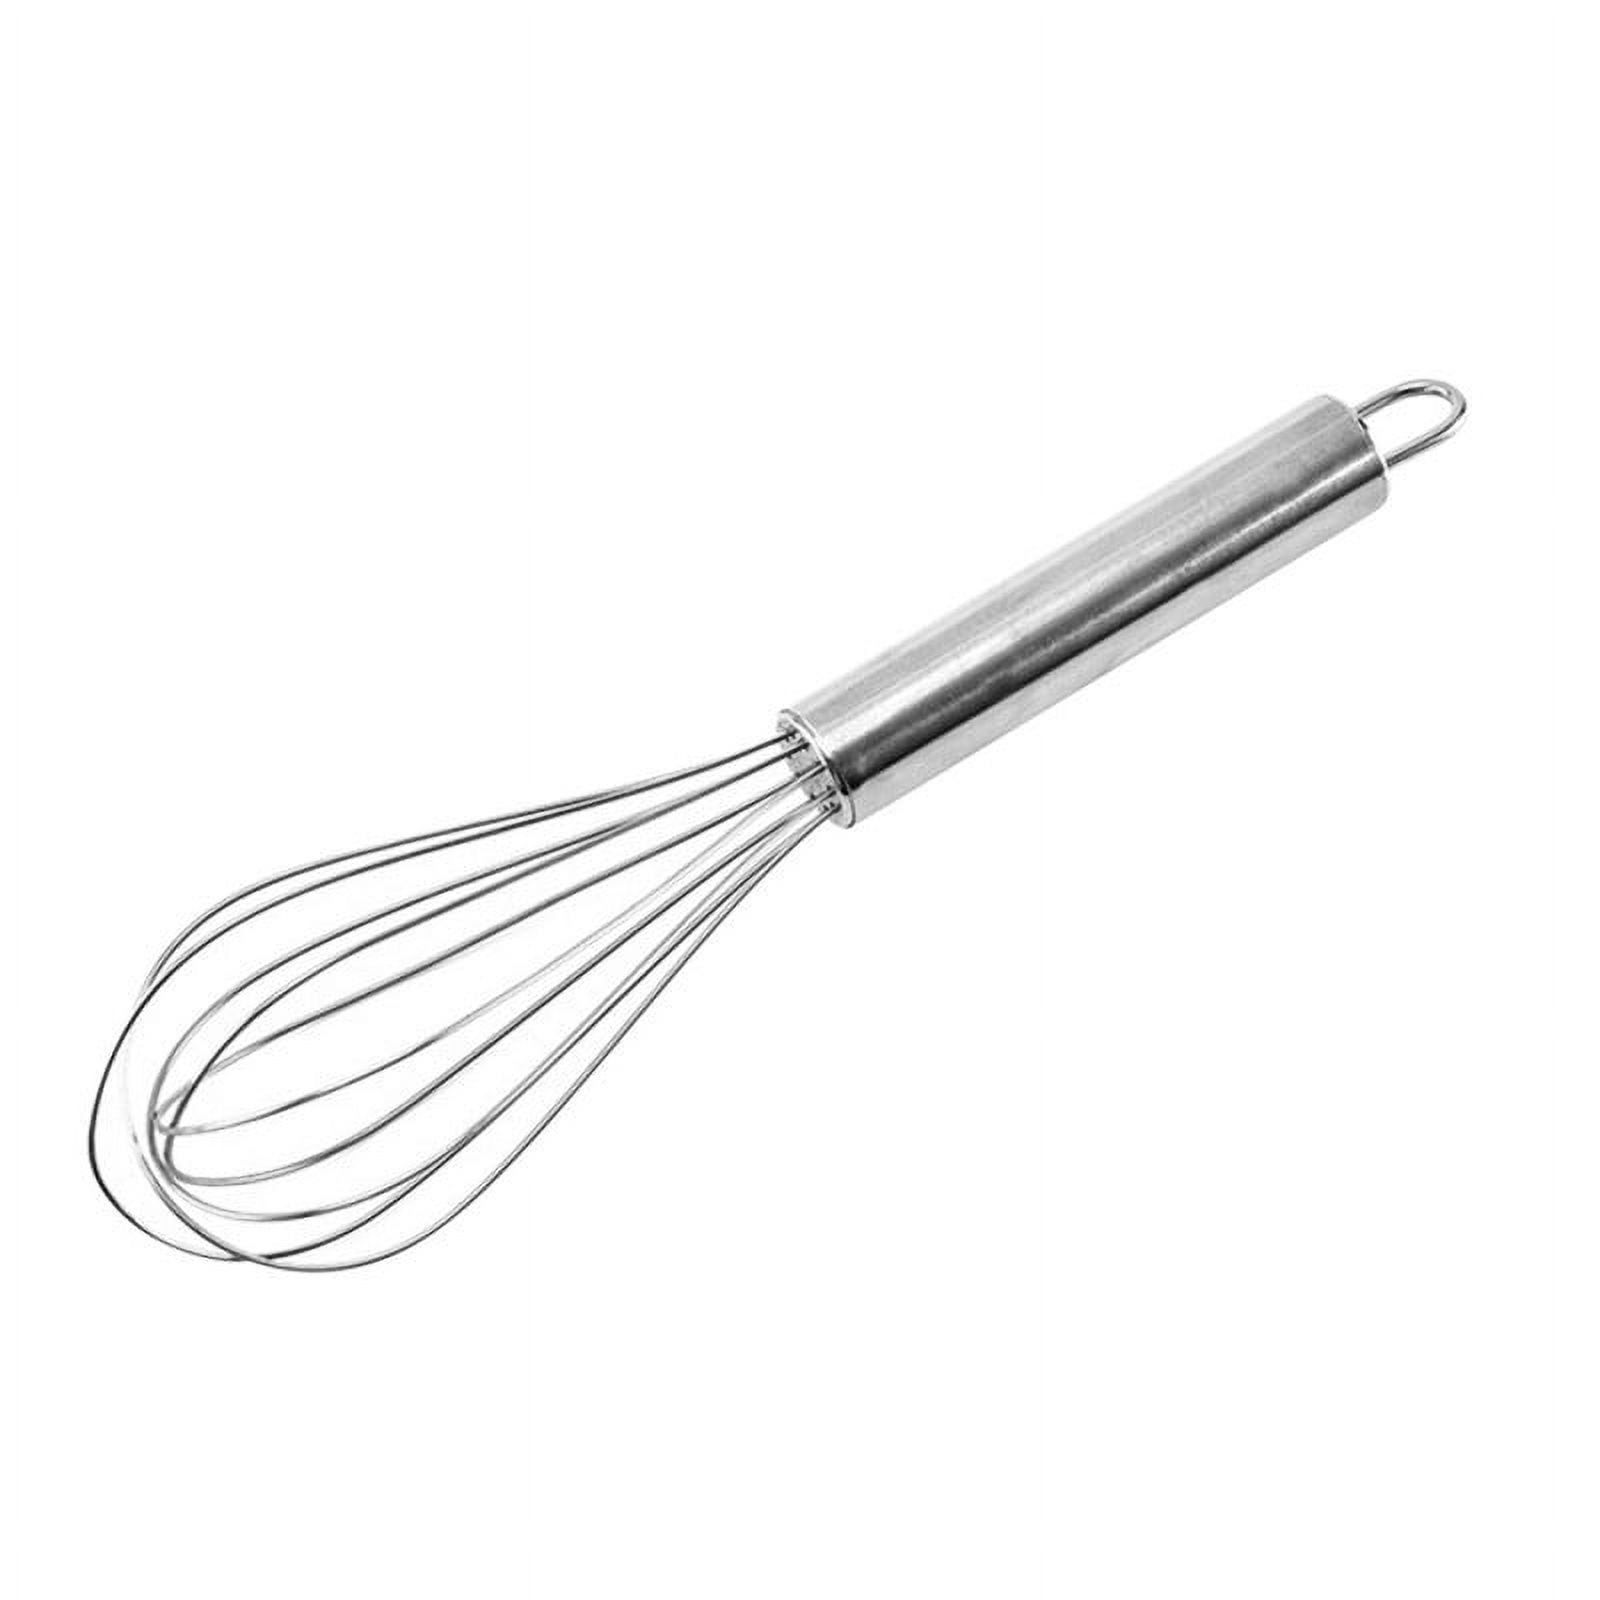 Stainless Steel Egg Wire Tiny Whisks for Cooking Baking, Professional  Whisking Wisk Kitchen Tool Utensil, Beater Balloon Whisker/Wisks/Wisker for